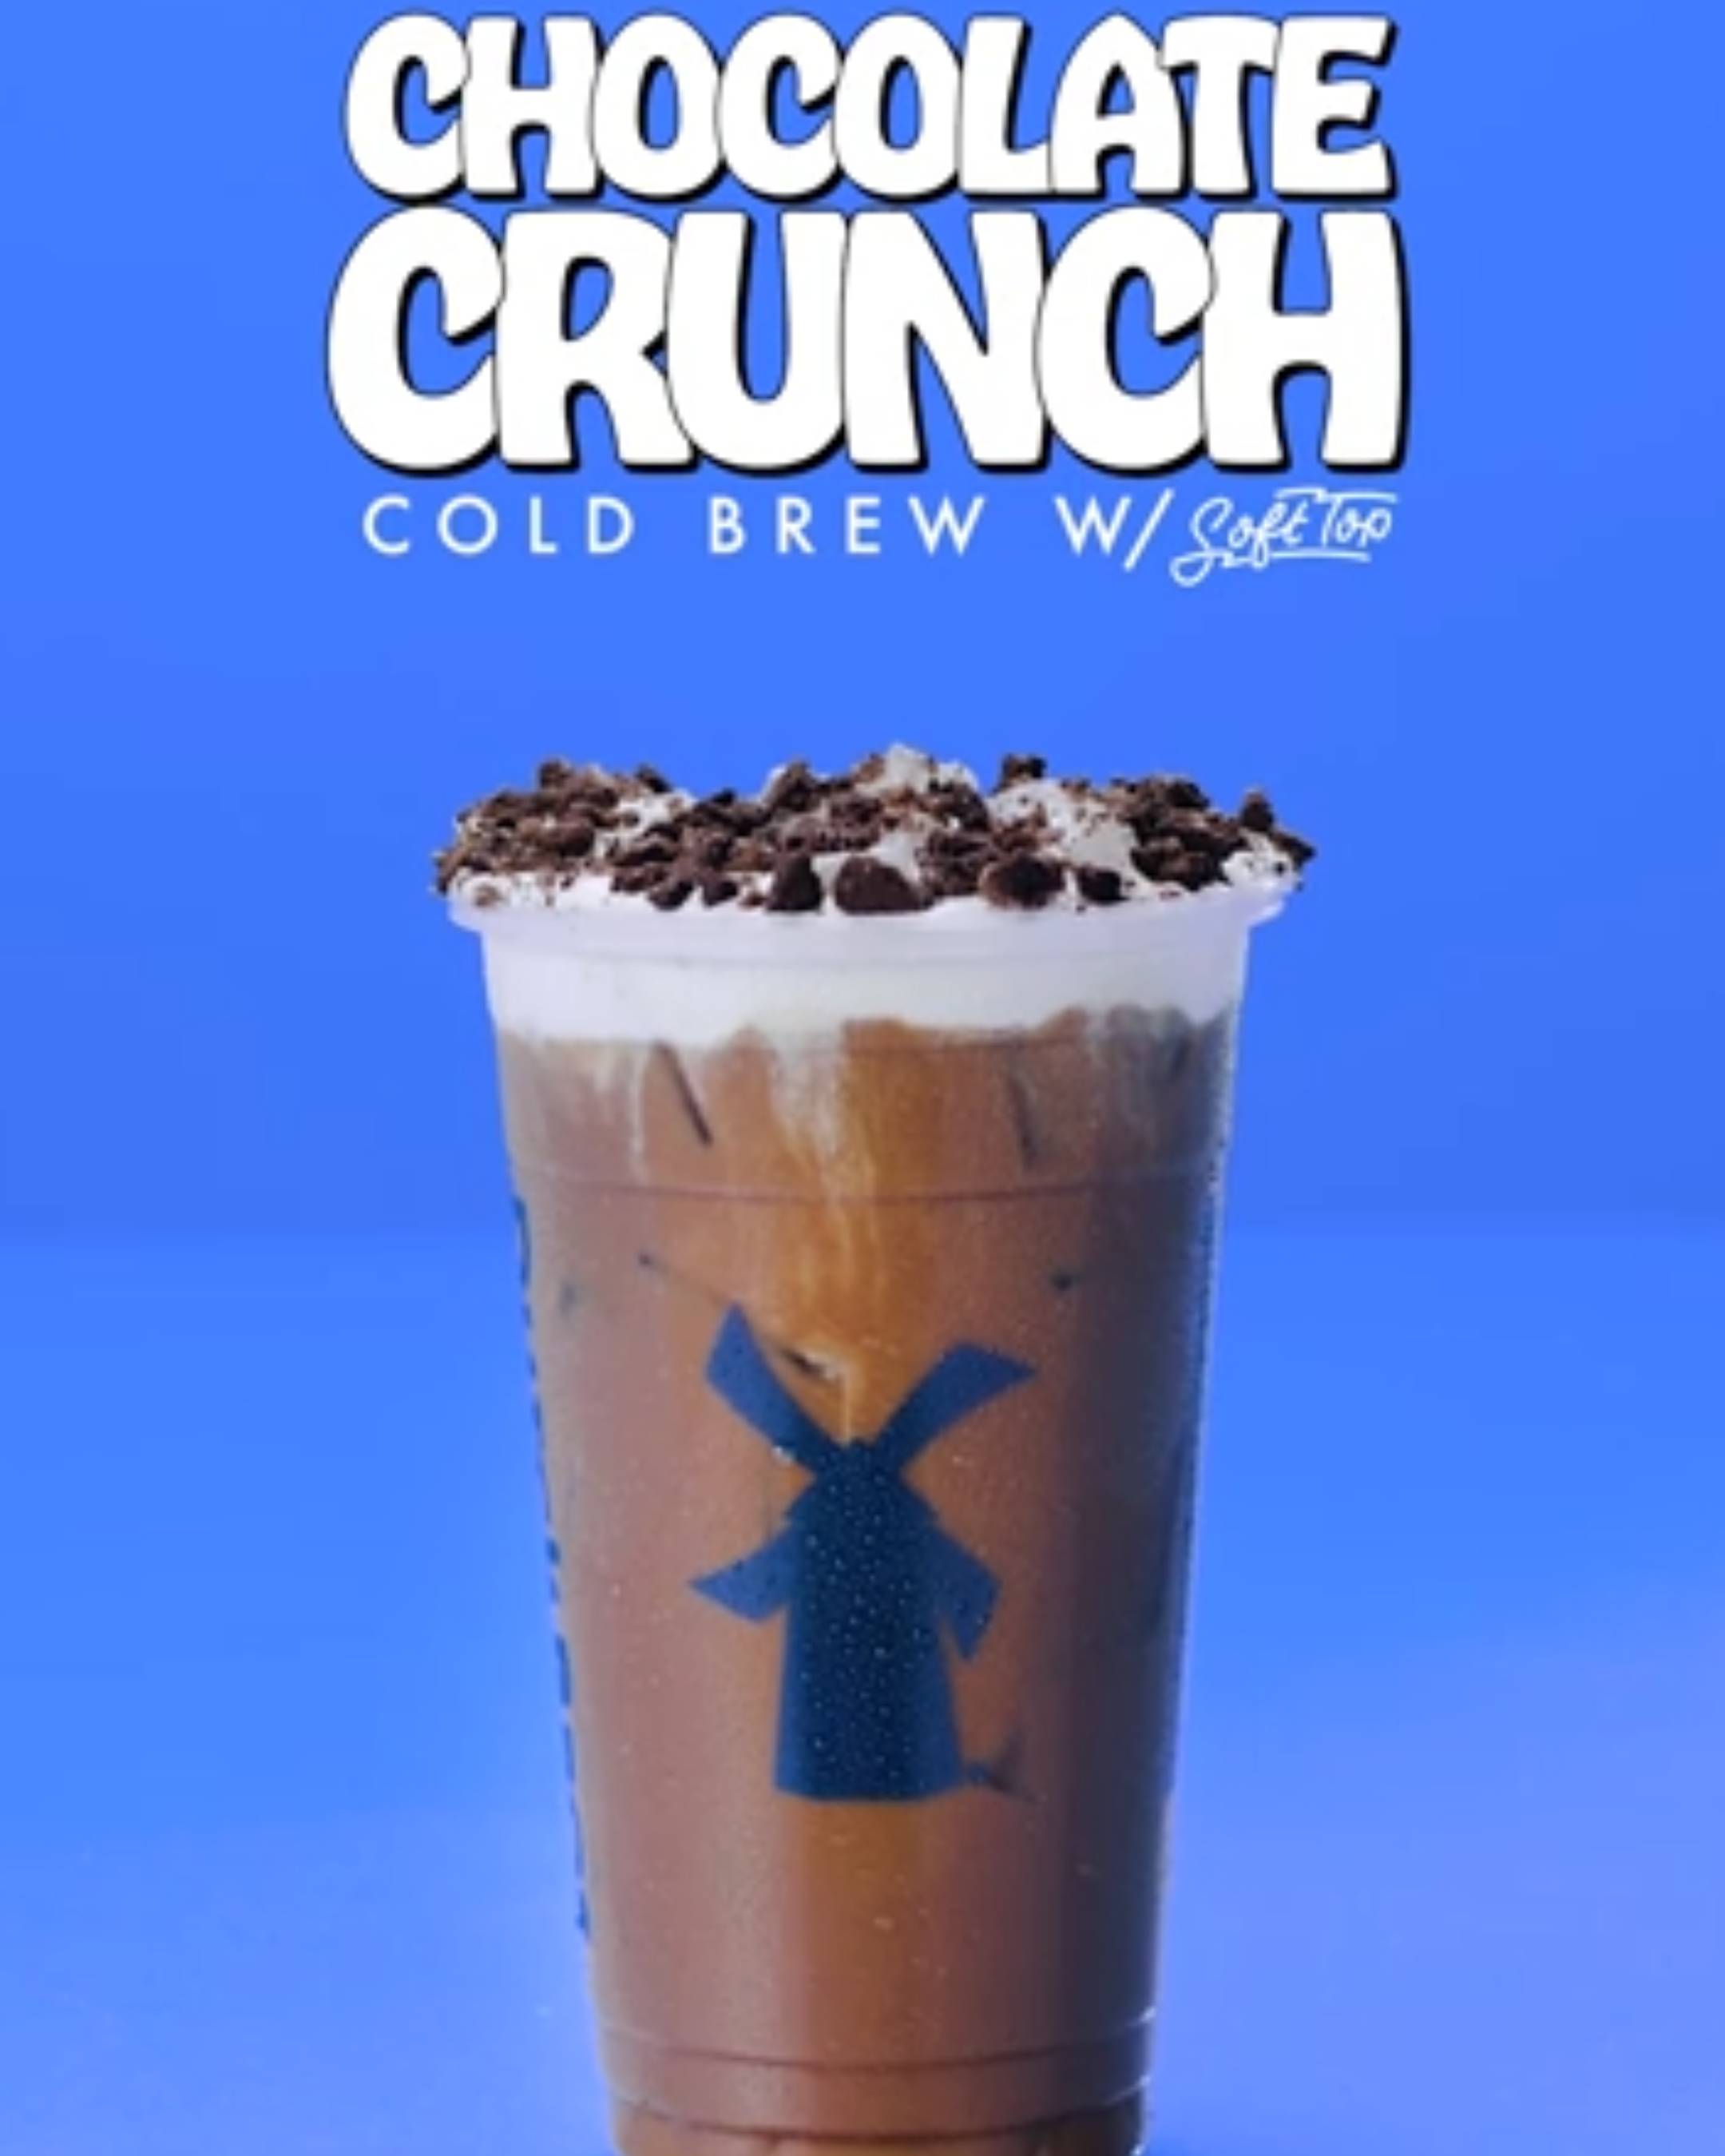 Play Video: The Chocolate Crunch Cold Brew features Dutch Bros’ Cold Brew, dark chocolate sauce, chocolate macadamia nut flavor and chocolate milk topped with Soft Top and cookie crumbles!